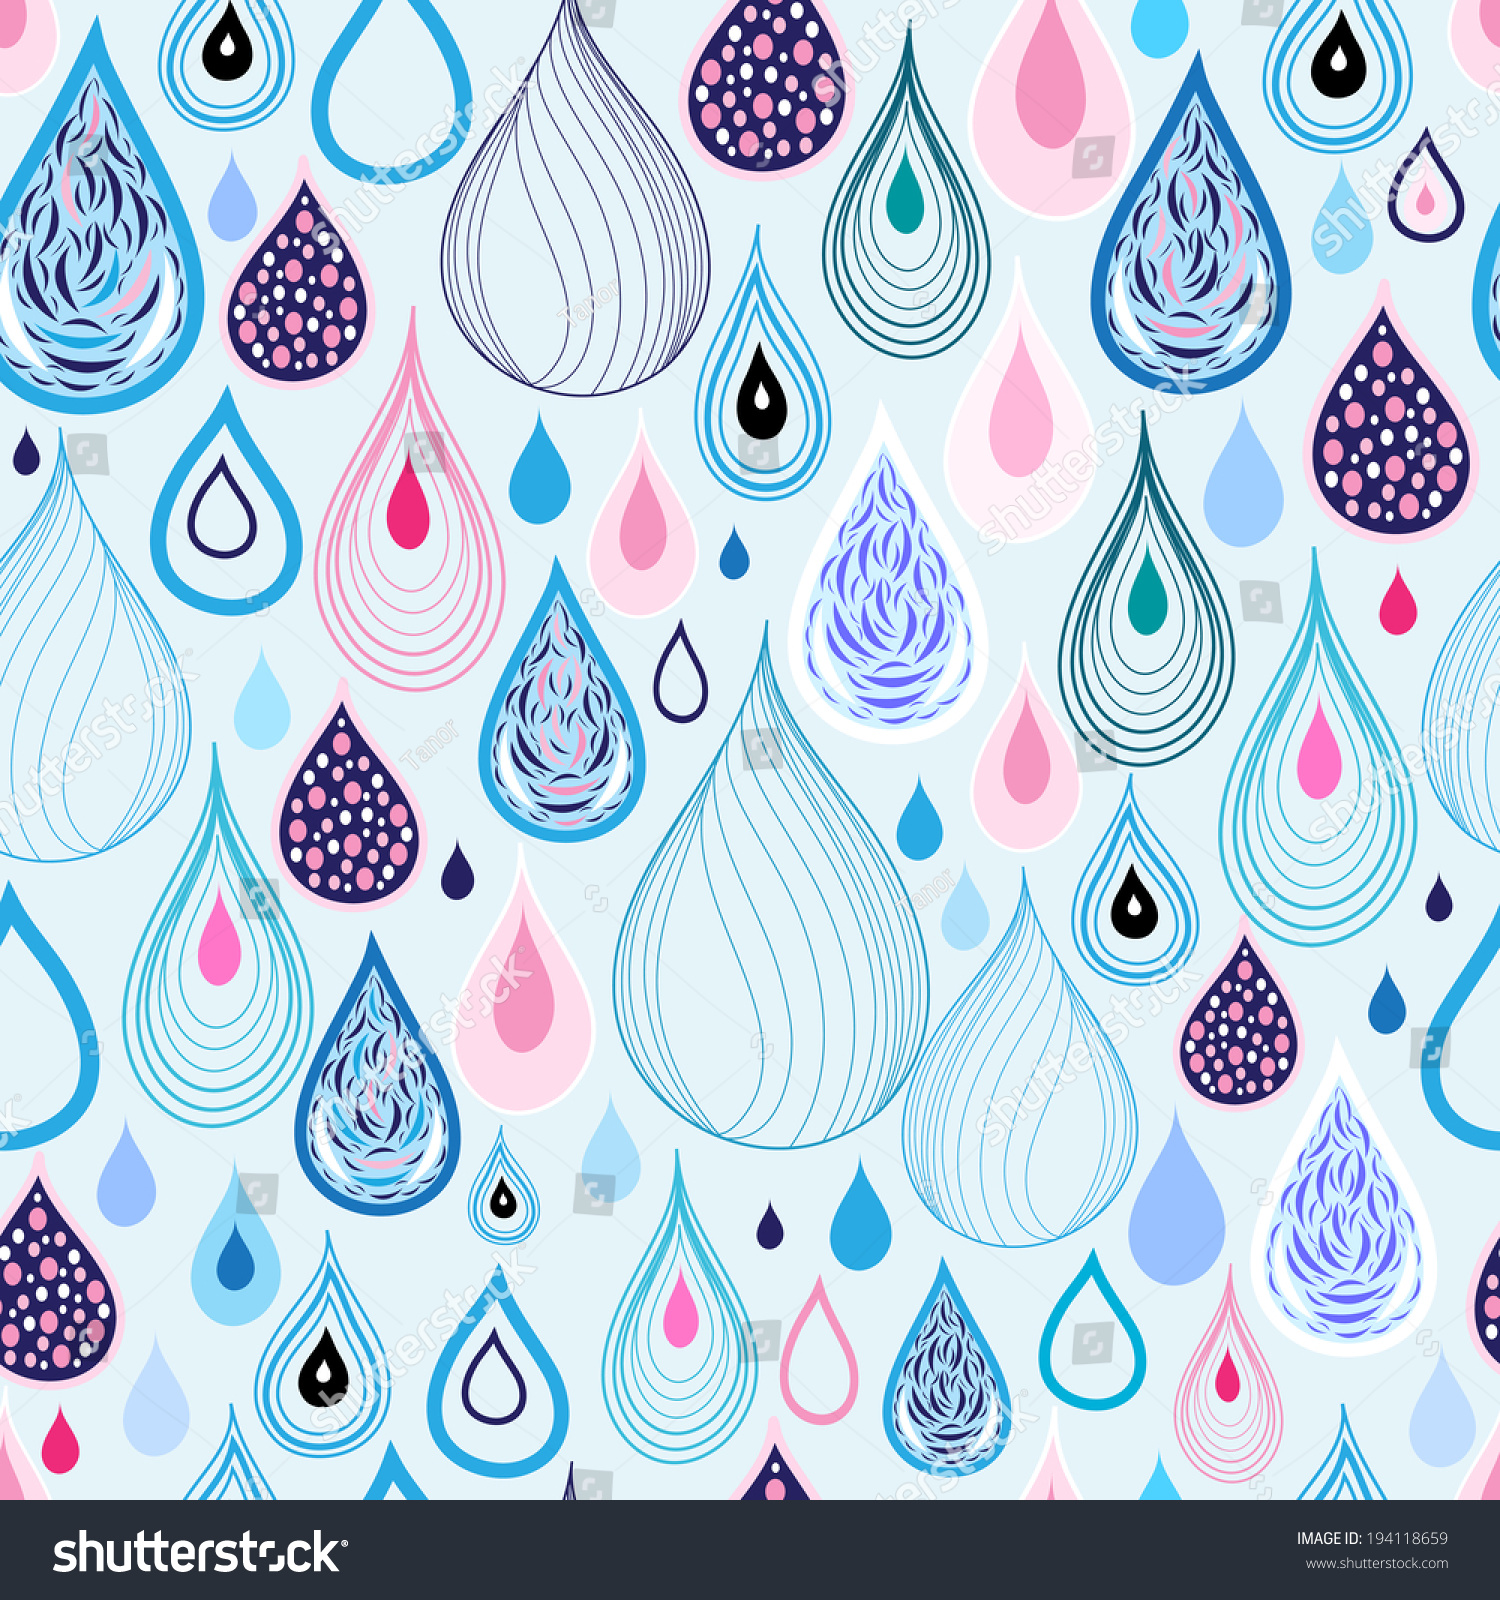 Graphic Pattern Of Raindrops On A Light Blue Background Stock Vector ...